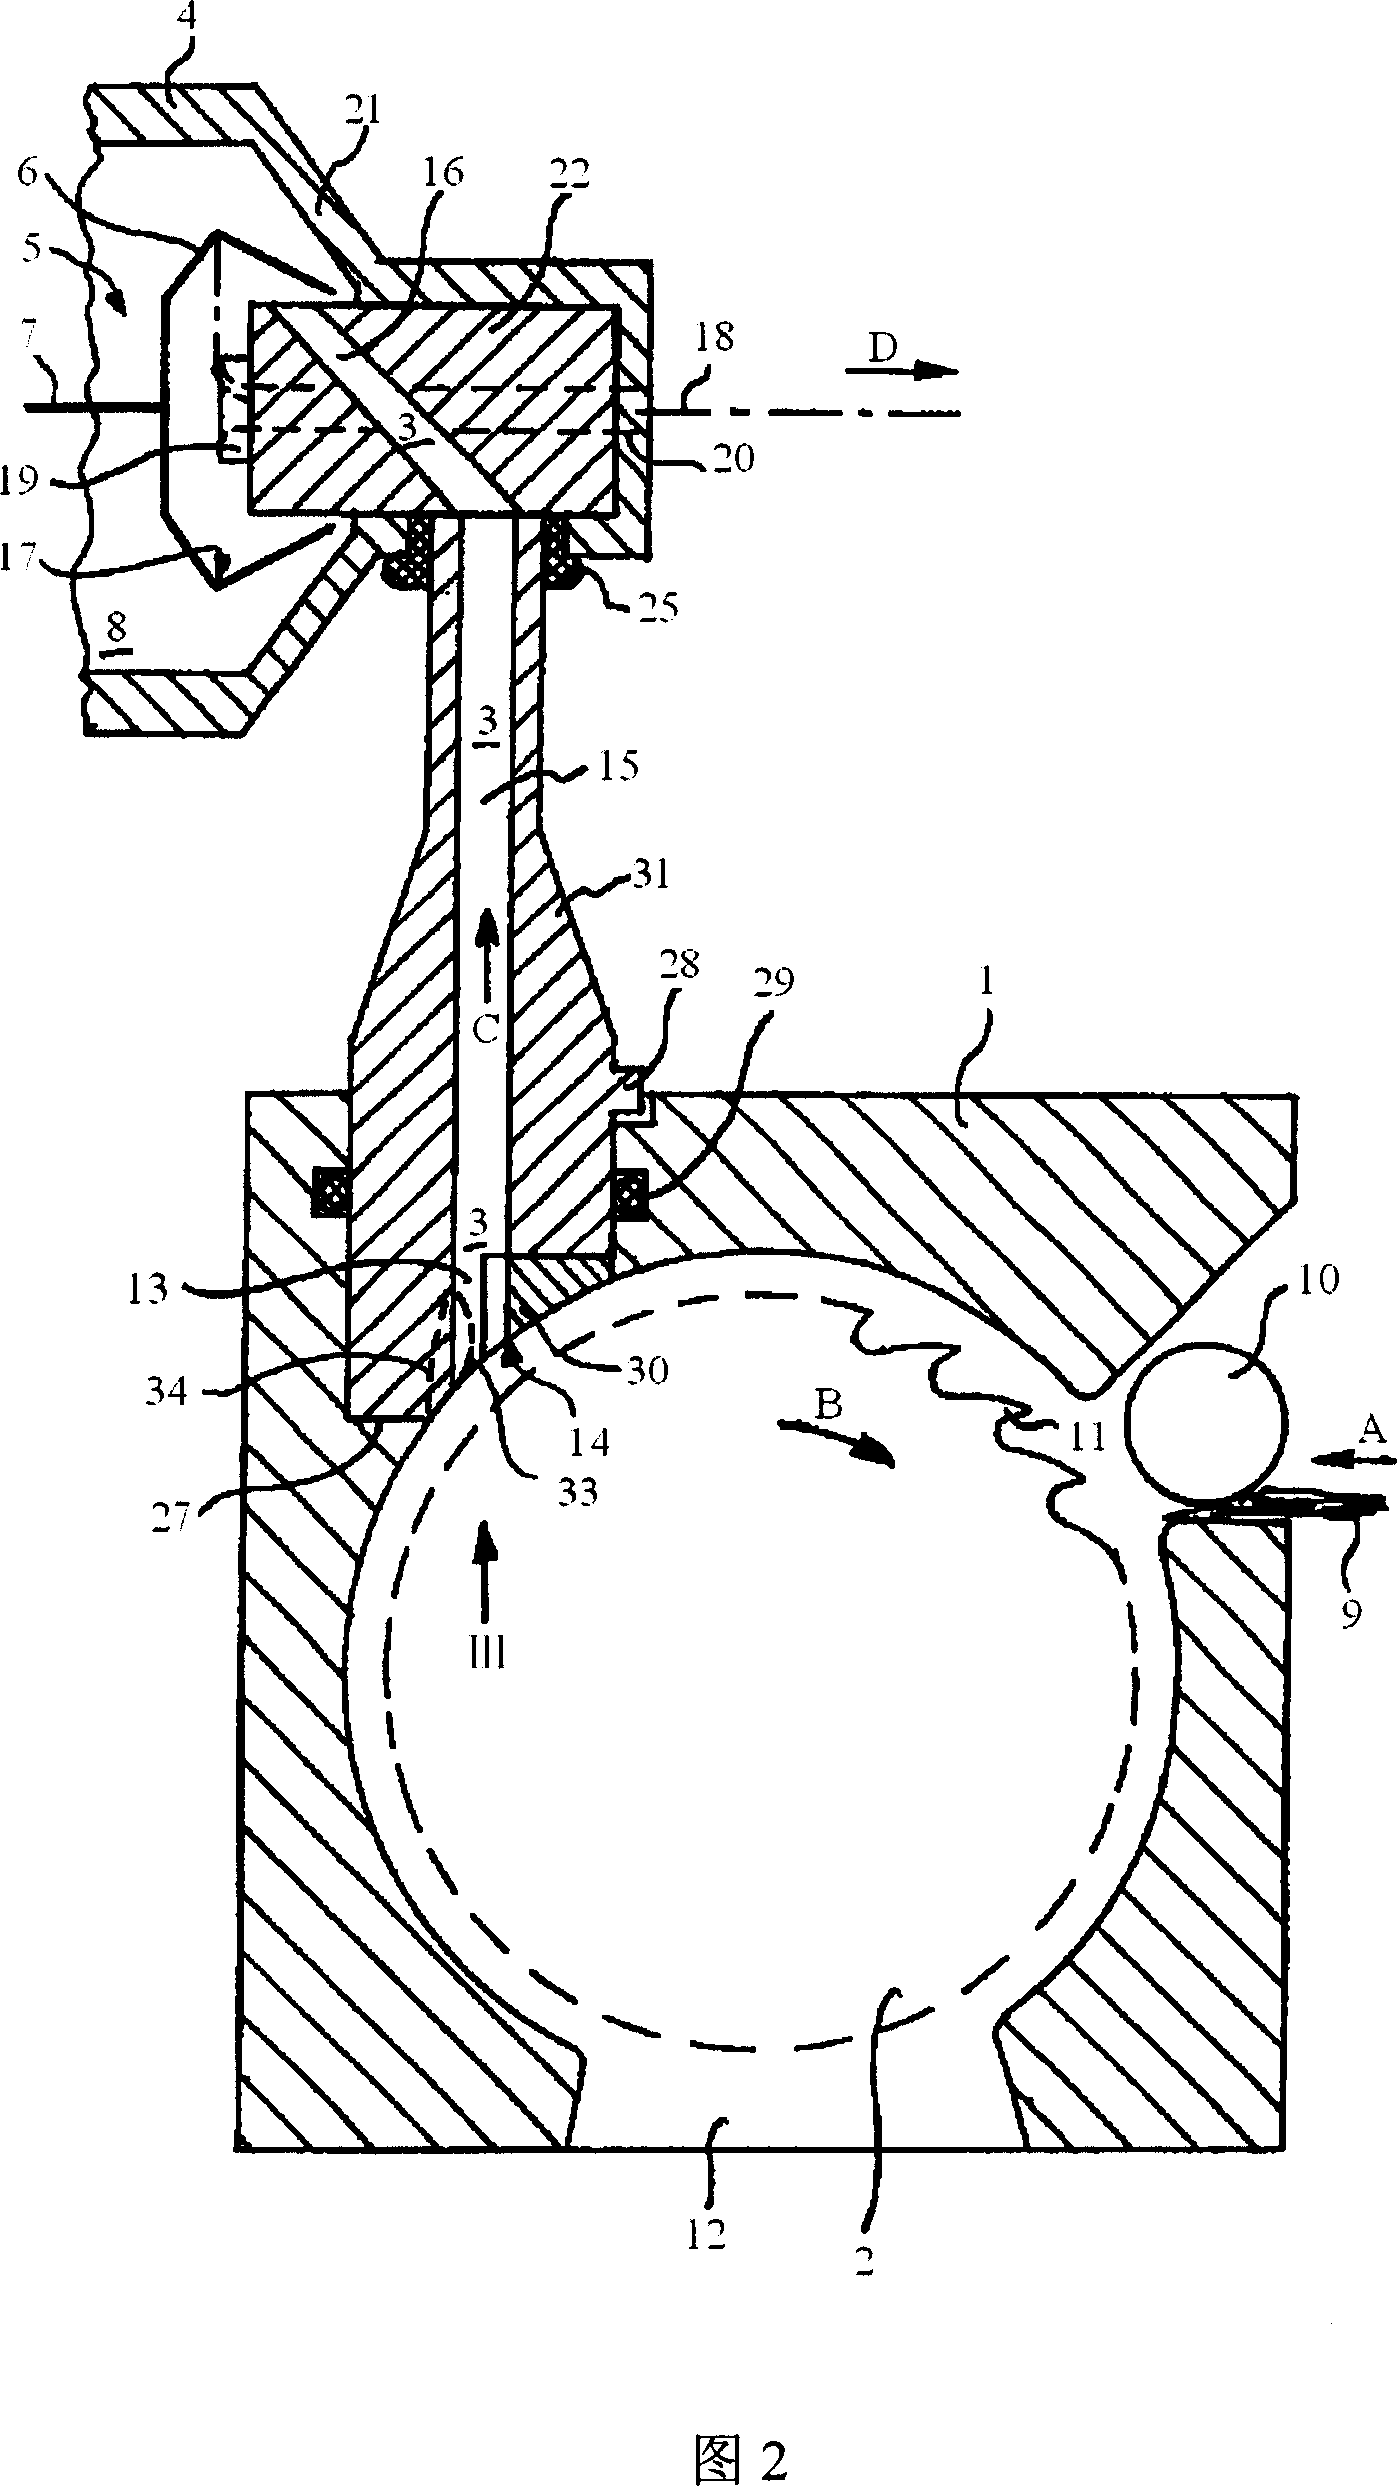 Open-end spinning apparatus with fiber transport channel consisting of several channel structural components